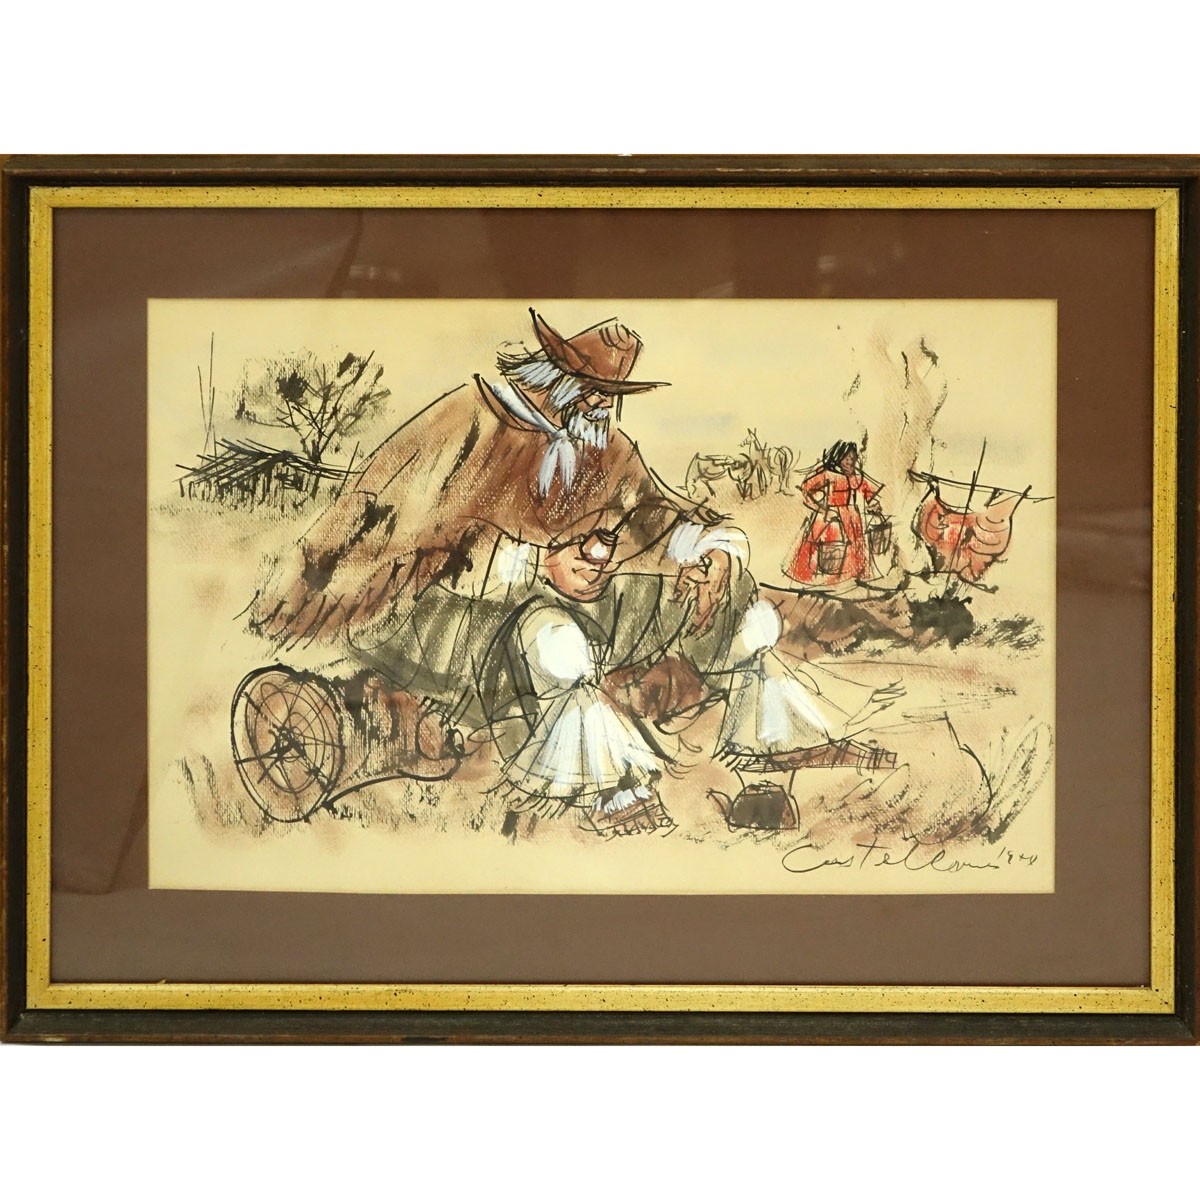 Elena Castellanos (20th C) Watercolor on Paper, Seated Gaucho Cowboy, Signed and Dated Lower Right. Good condition.